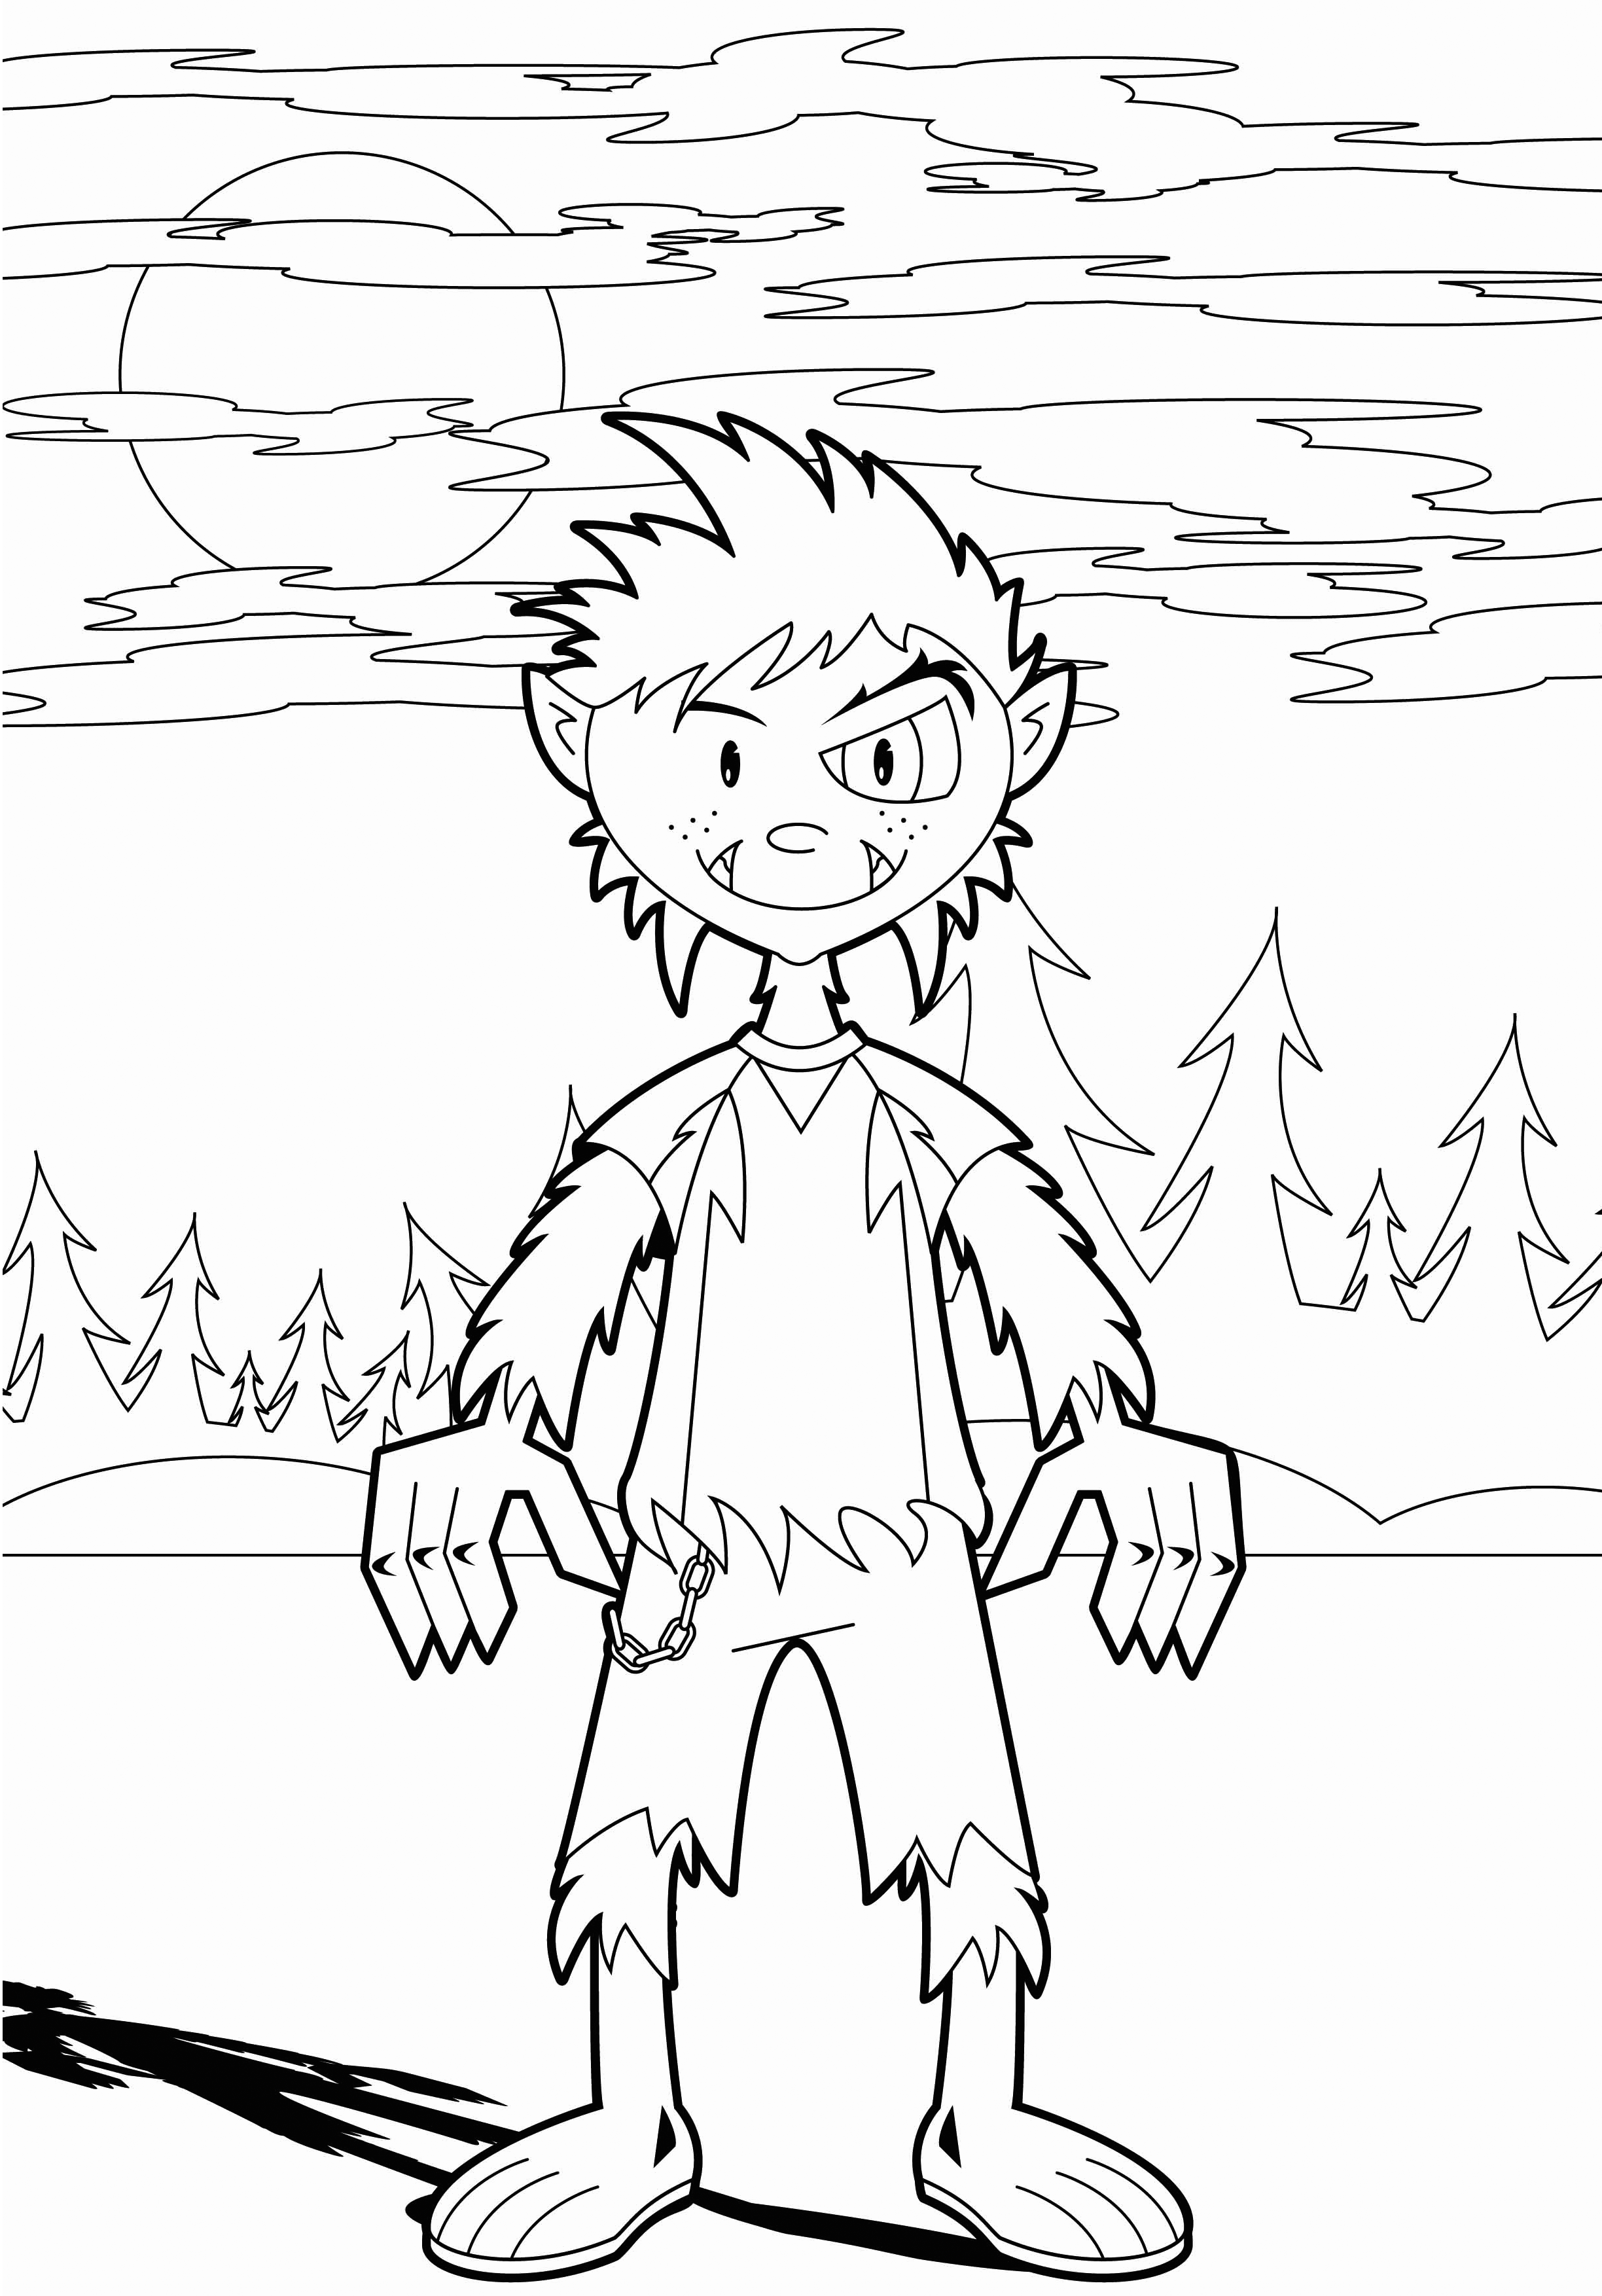 Changing Werewolf Coloring Page